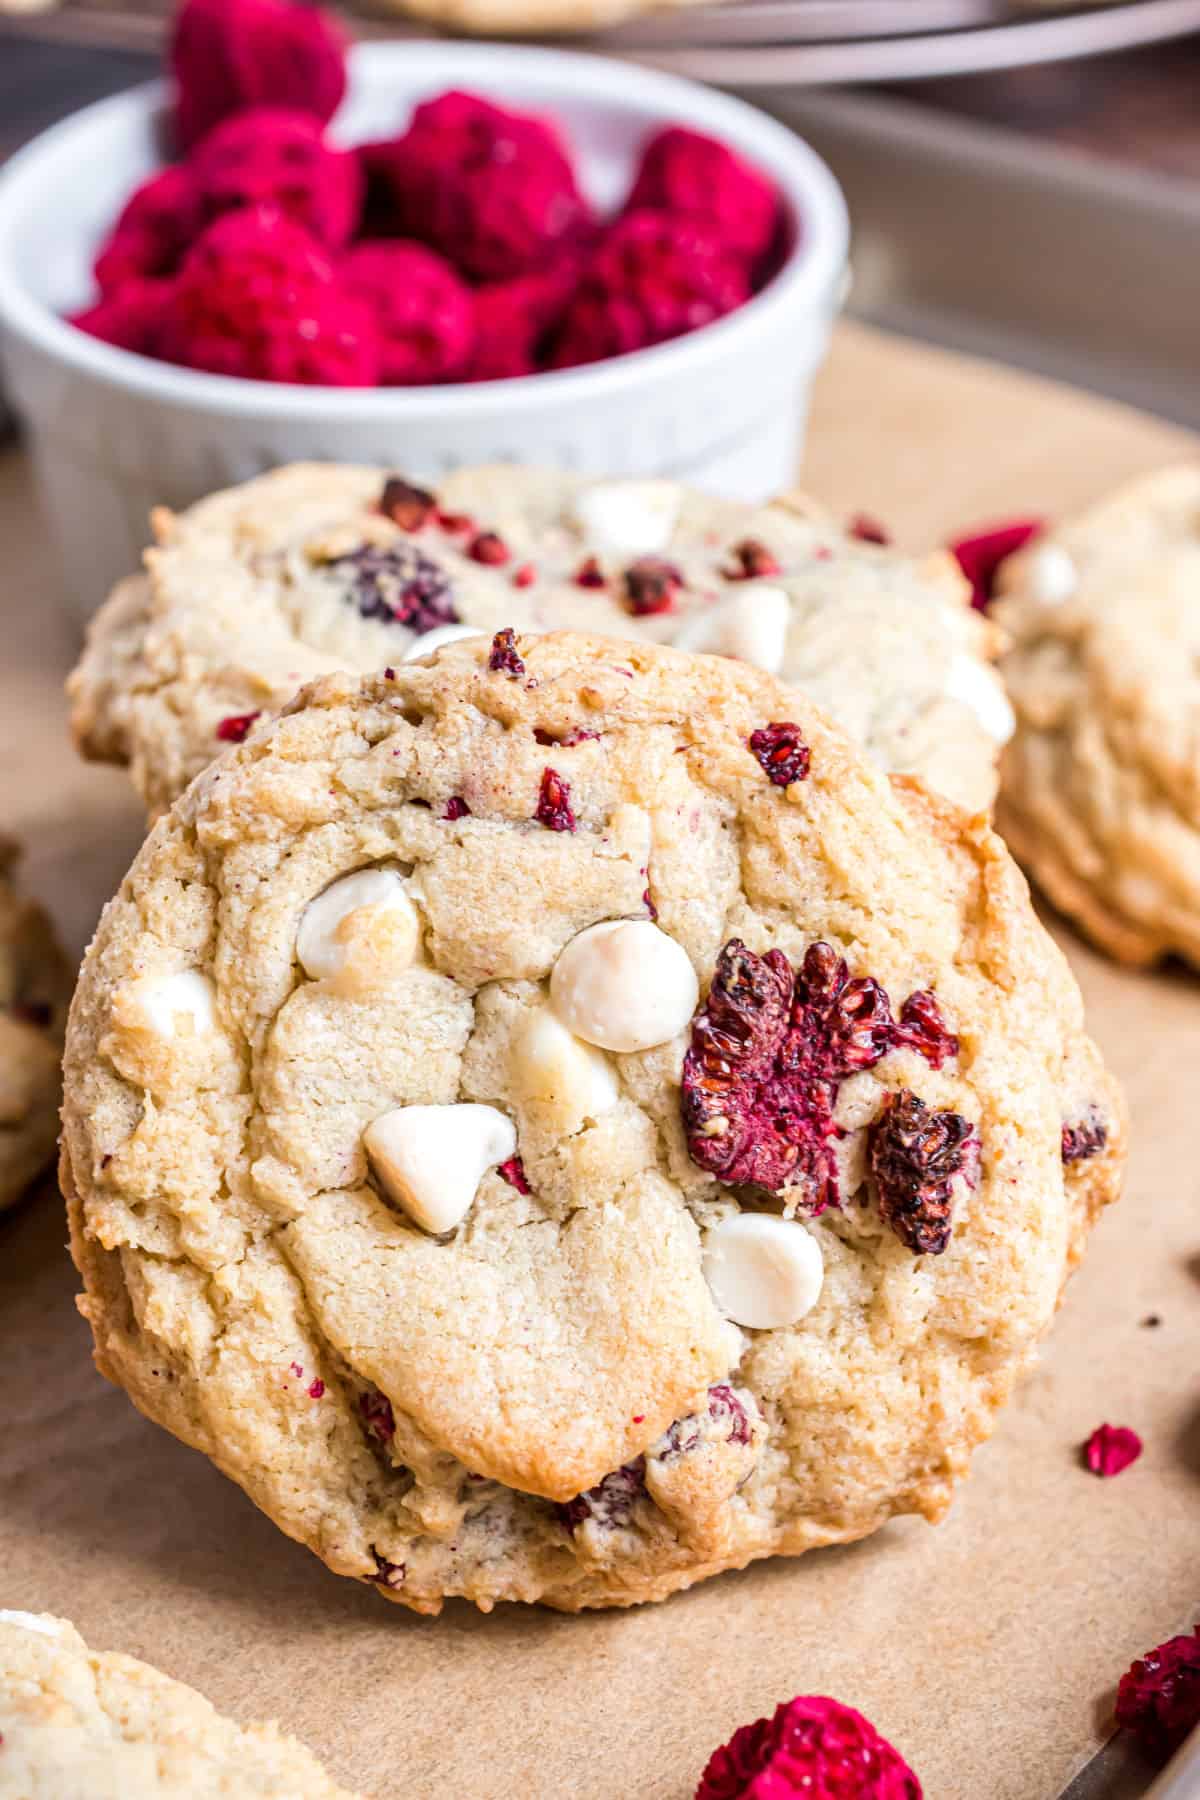 Subway copycat cookie with raspberries and white chocolate chips.